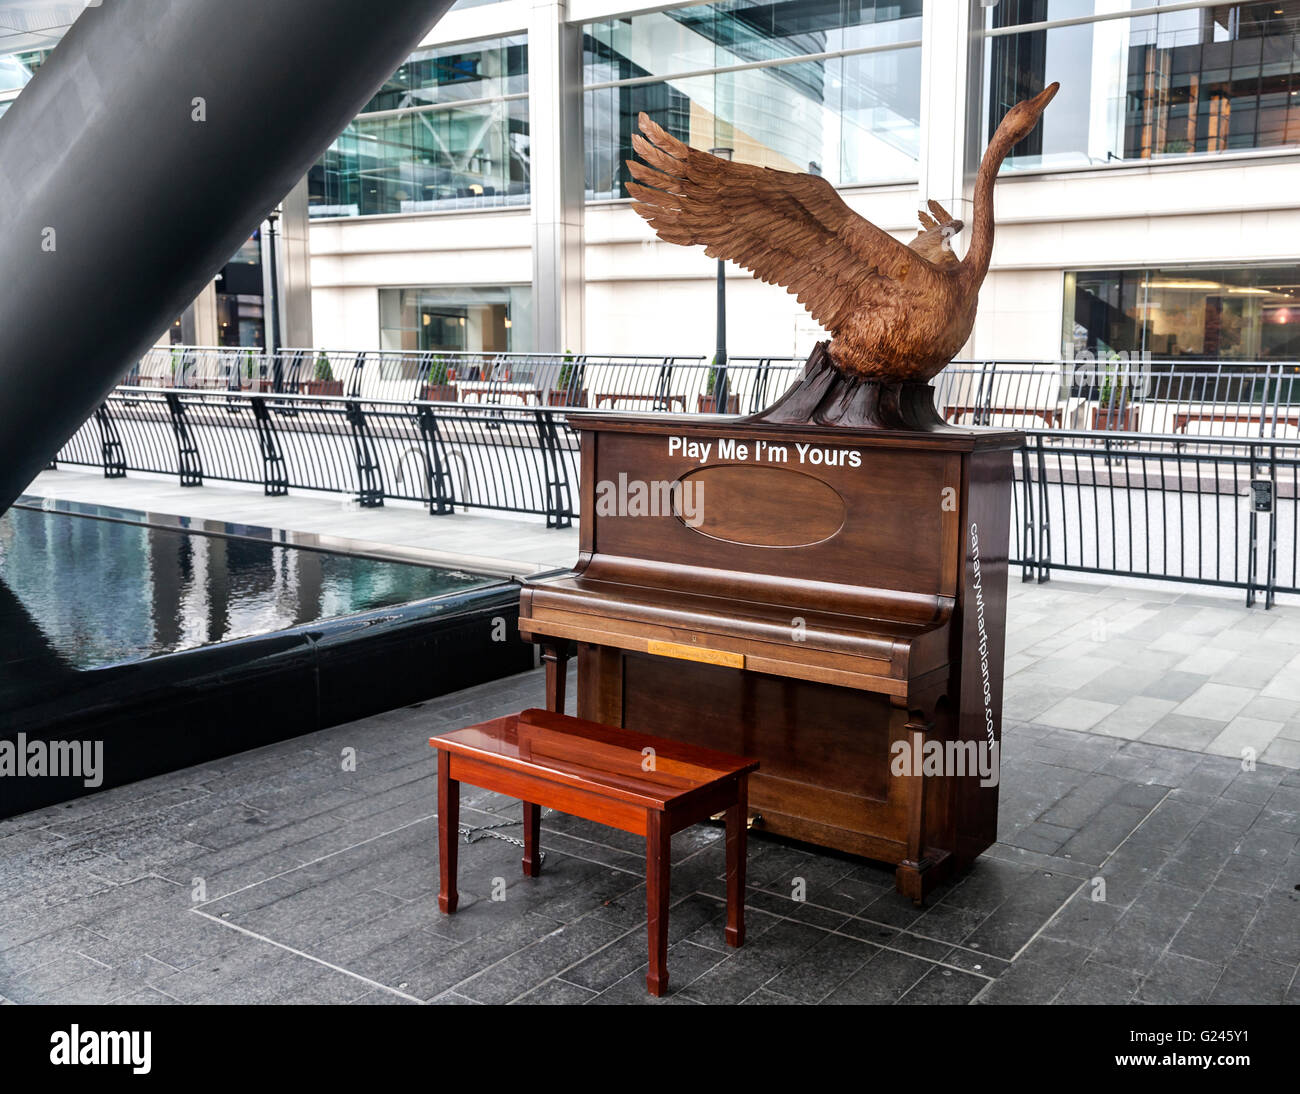 One of many pianos in Play Me I’m Yours, a Global artwork by British artist Luke Jerram, Canary Wharf, London. Stock Photo